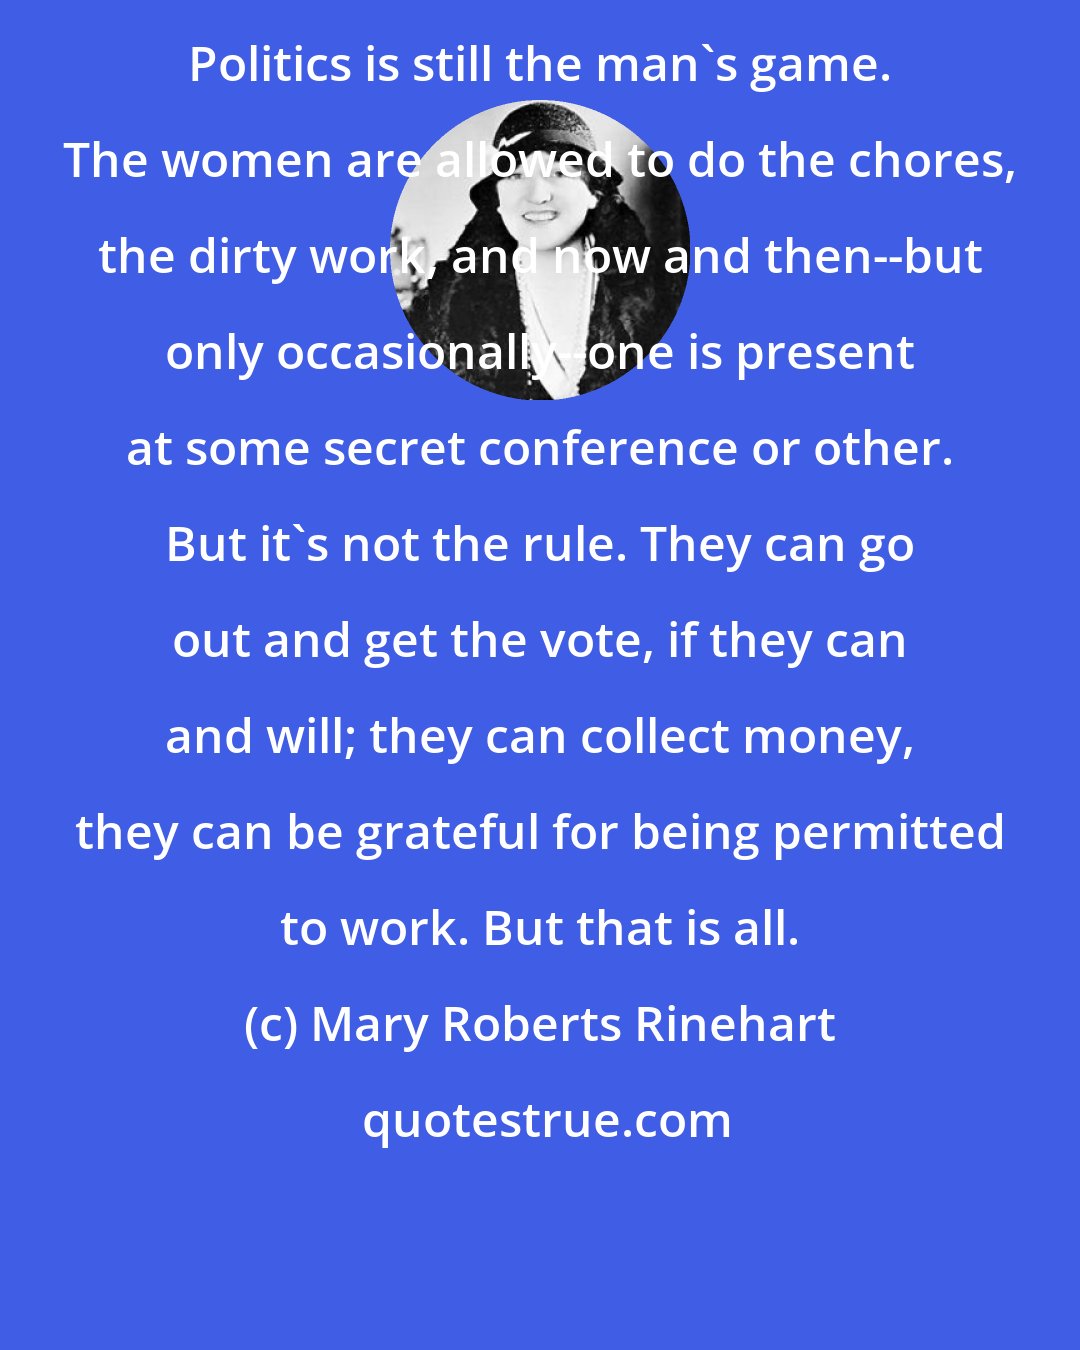 Mary Roberts Rinehart: Politics is still the man's game. The women are allowed to do the chores, the dirty work, and now and then--but only occasionally--one is present at some secret conference or other. But it's not the rule. They can go out and get the vote, if they can and will; they can collect money, they can be grateful for being permitted to work. But that is all.